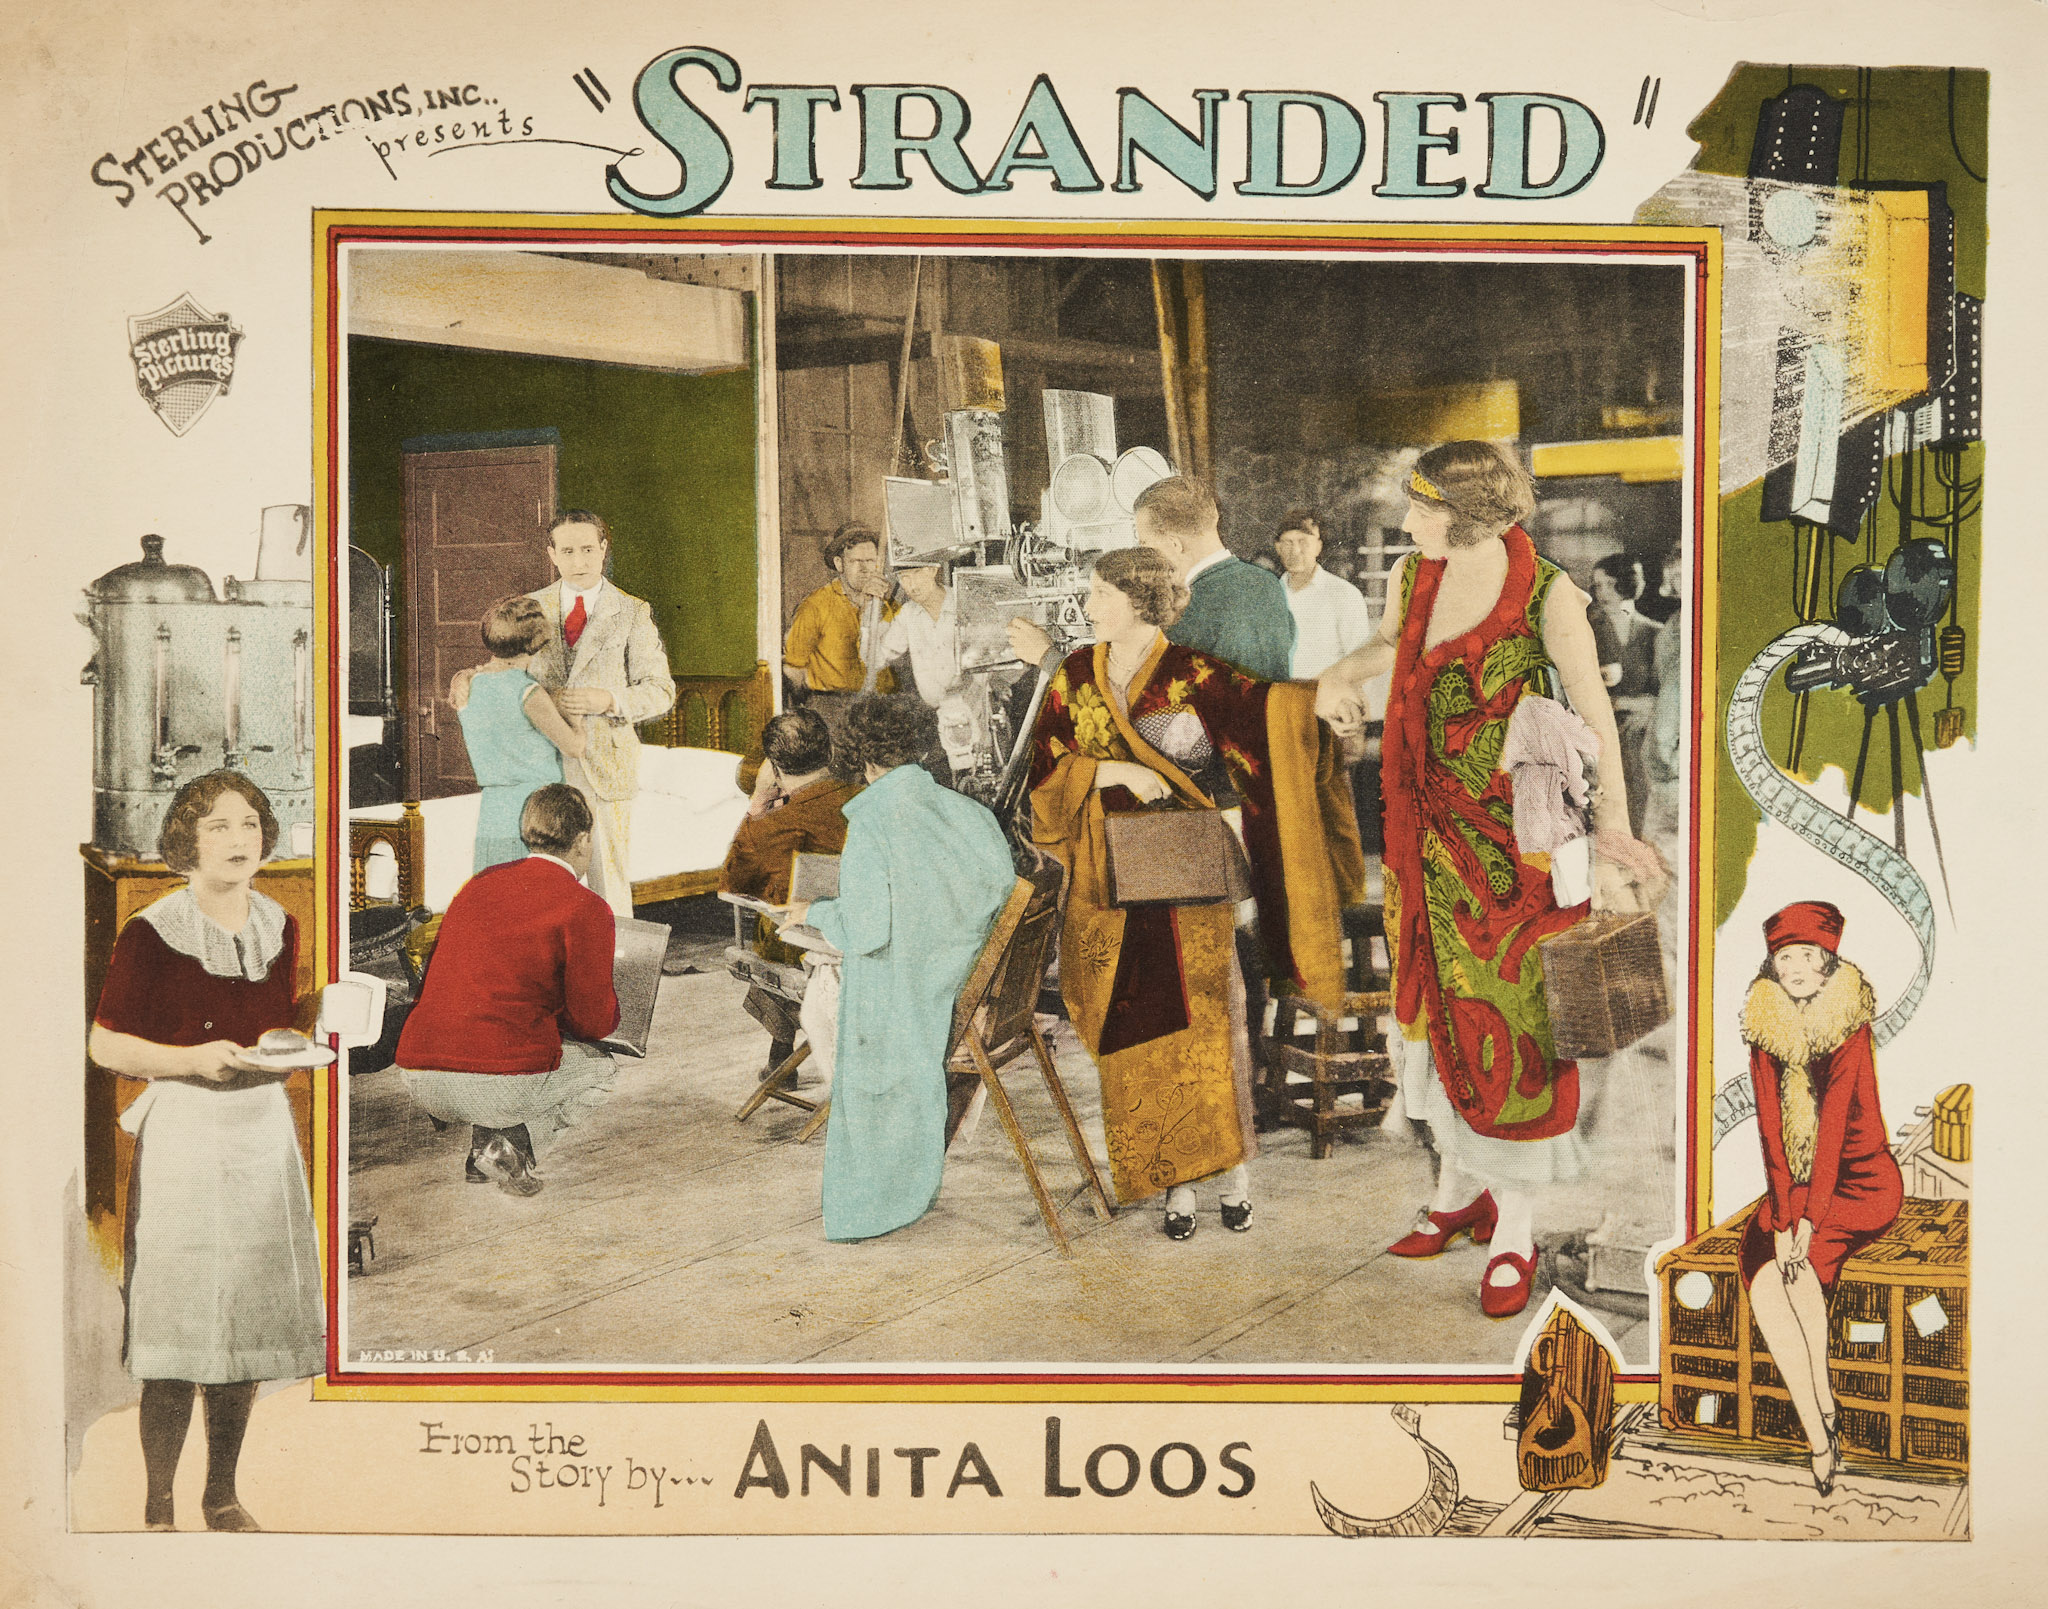 ‘Stranded,’ 1916. Story by Anita Loos; written by Frances Guilhan; film editing by Leotta Whytock. Photo credit: Dwight M. Cleveland Collection